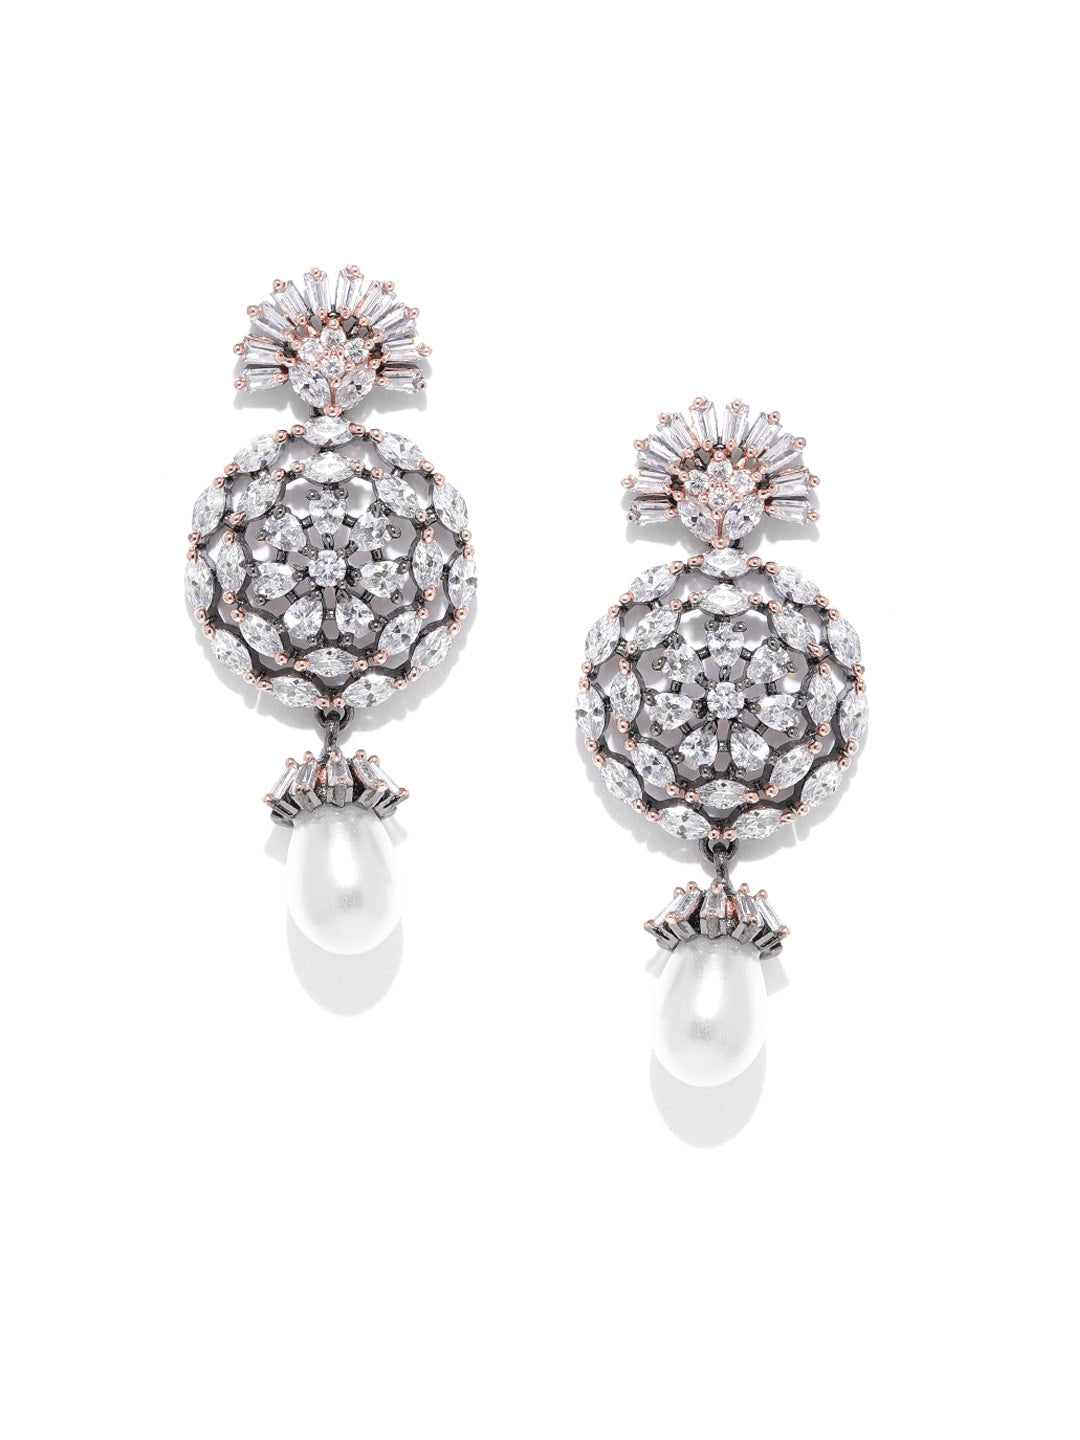 Floral Shaped American Diamond Earring With Pearl Drop For Women And Girls